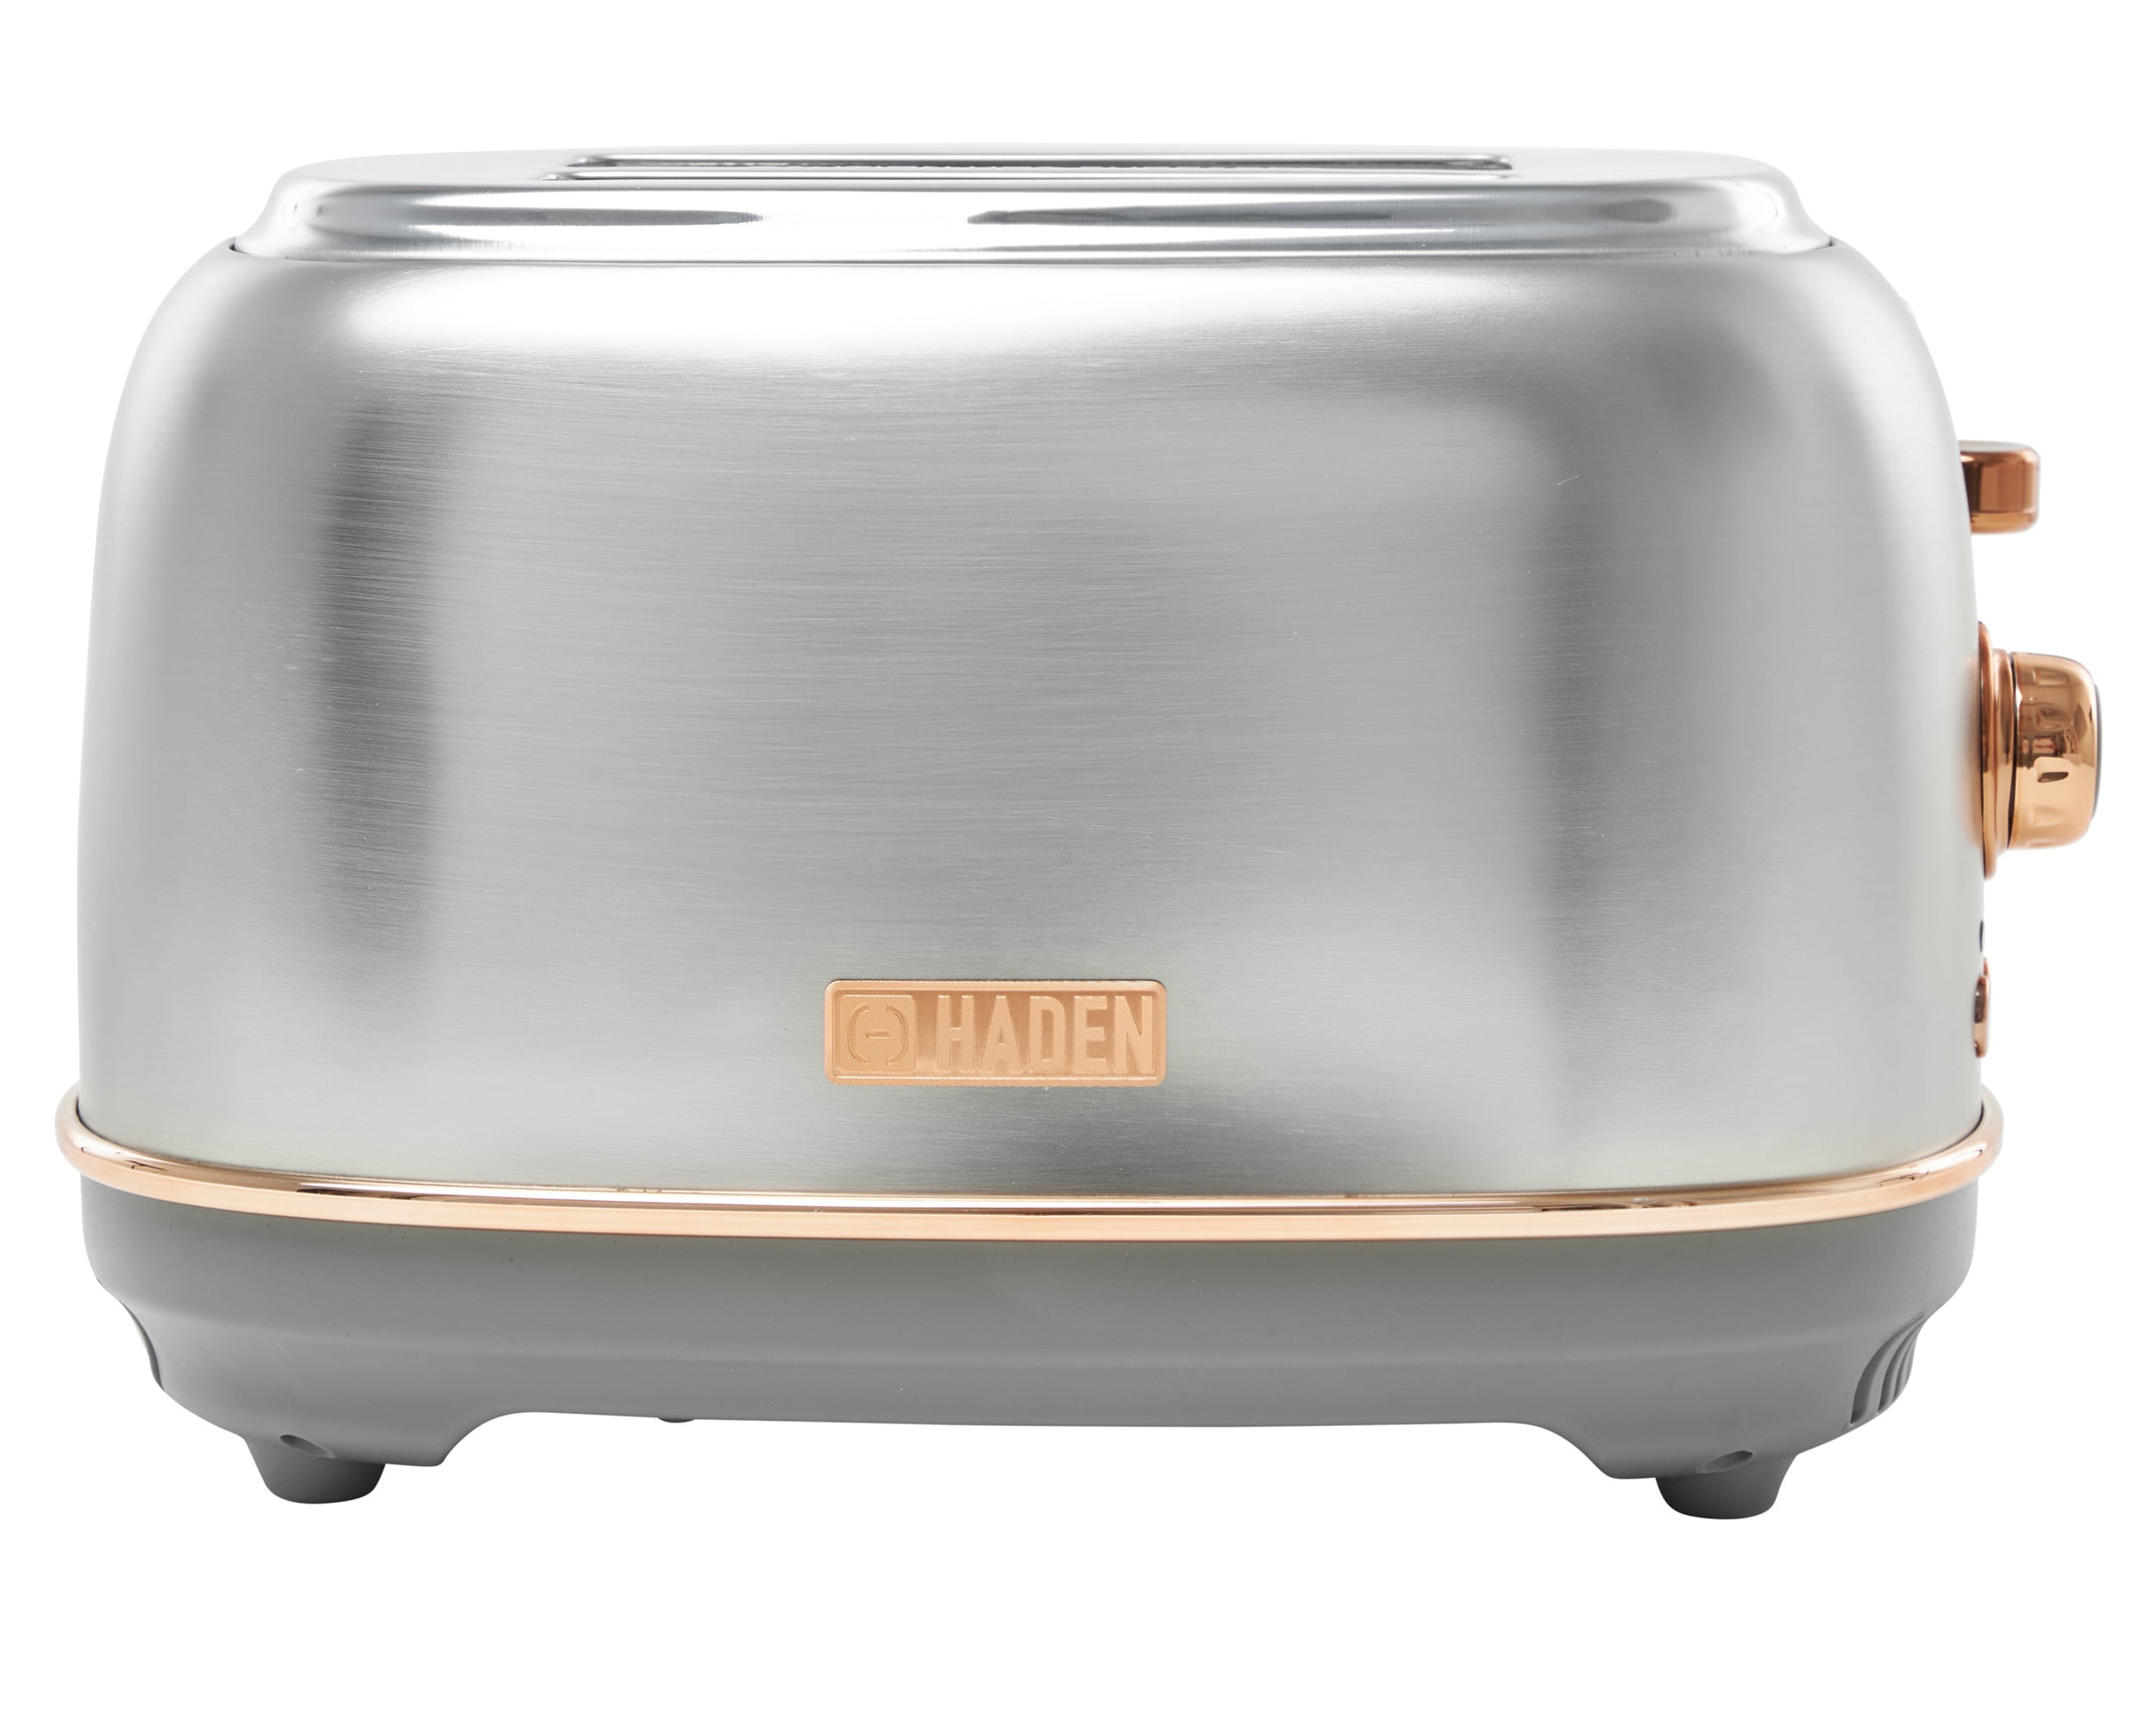 Ultrean Toaster 2 Slice with Extra-Wide Slot, Retro Stainless Steel Toaster with Removable Crumb Tray, Small Toaster with 6 Brow